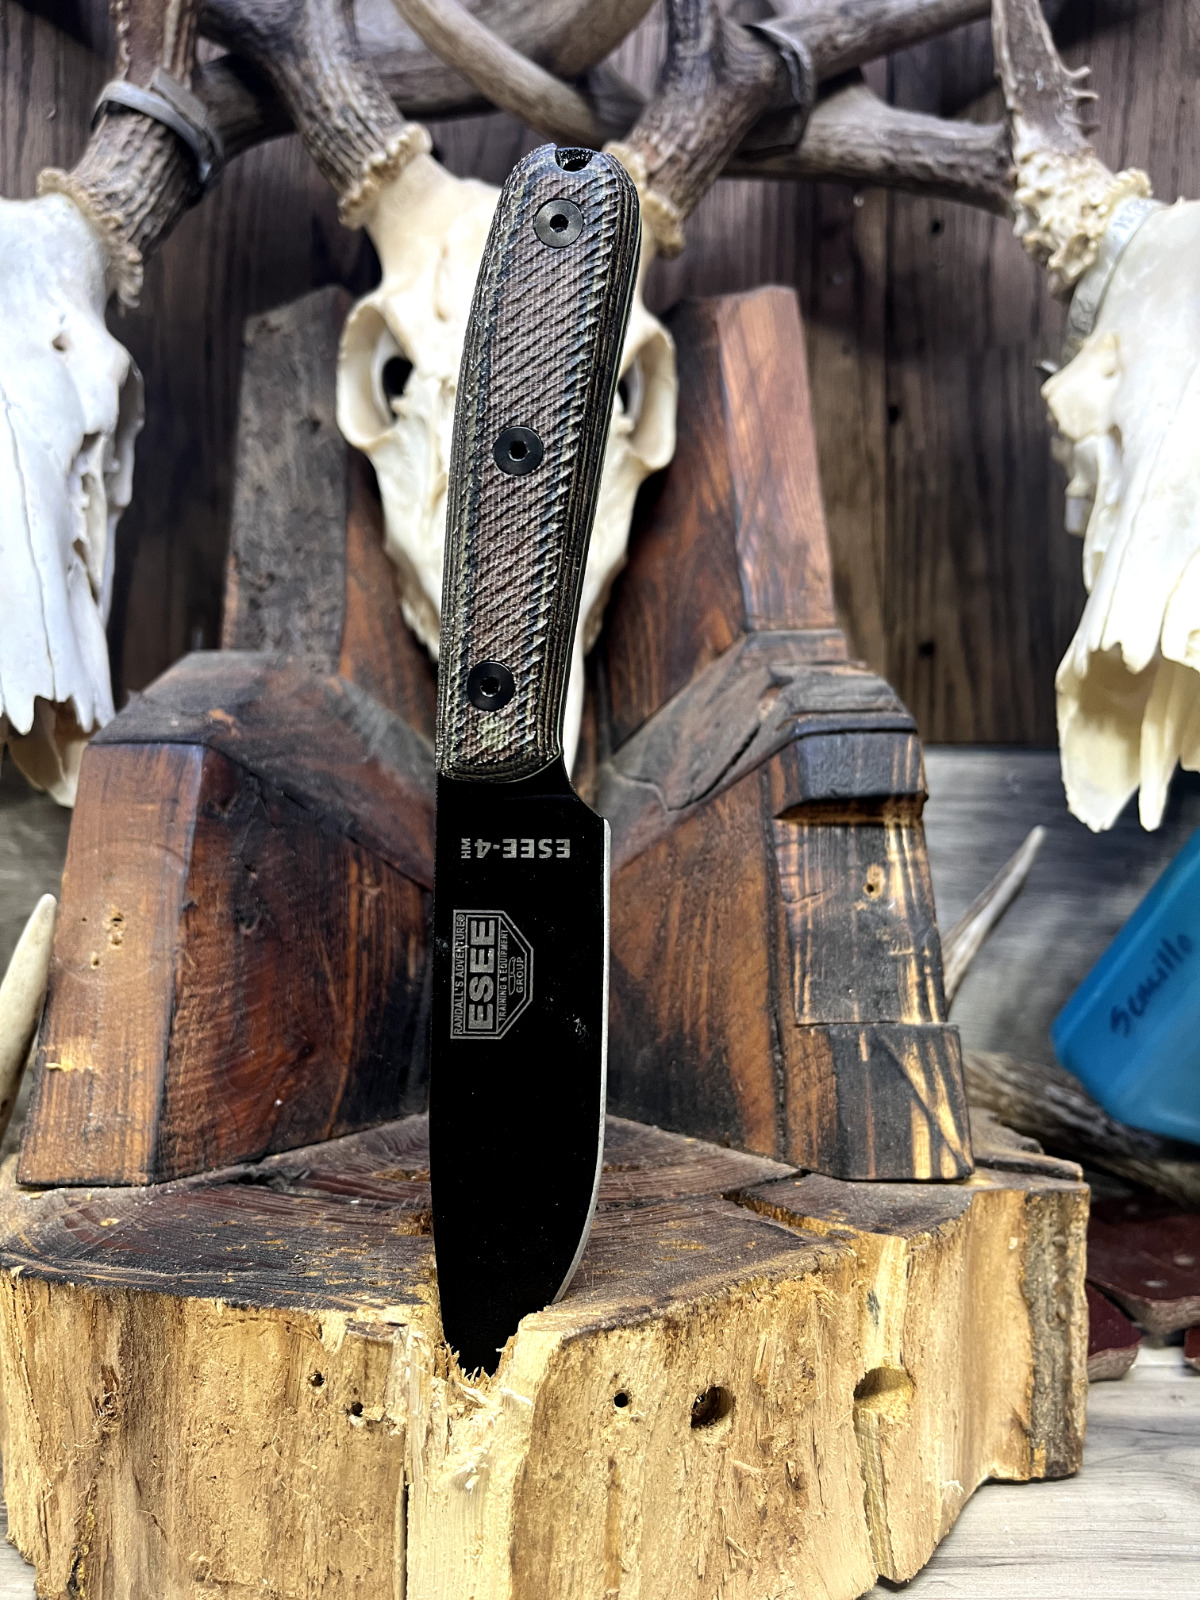 Custom Knife Handles for the ESEE-4HM / ESEE-3HM (Knife NOT included)